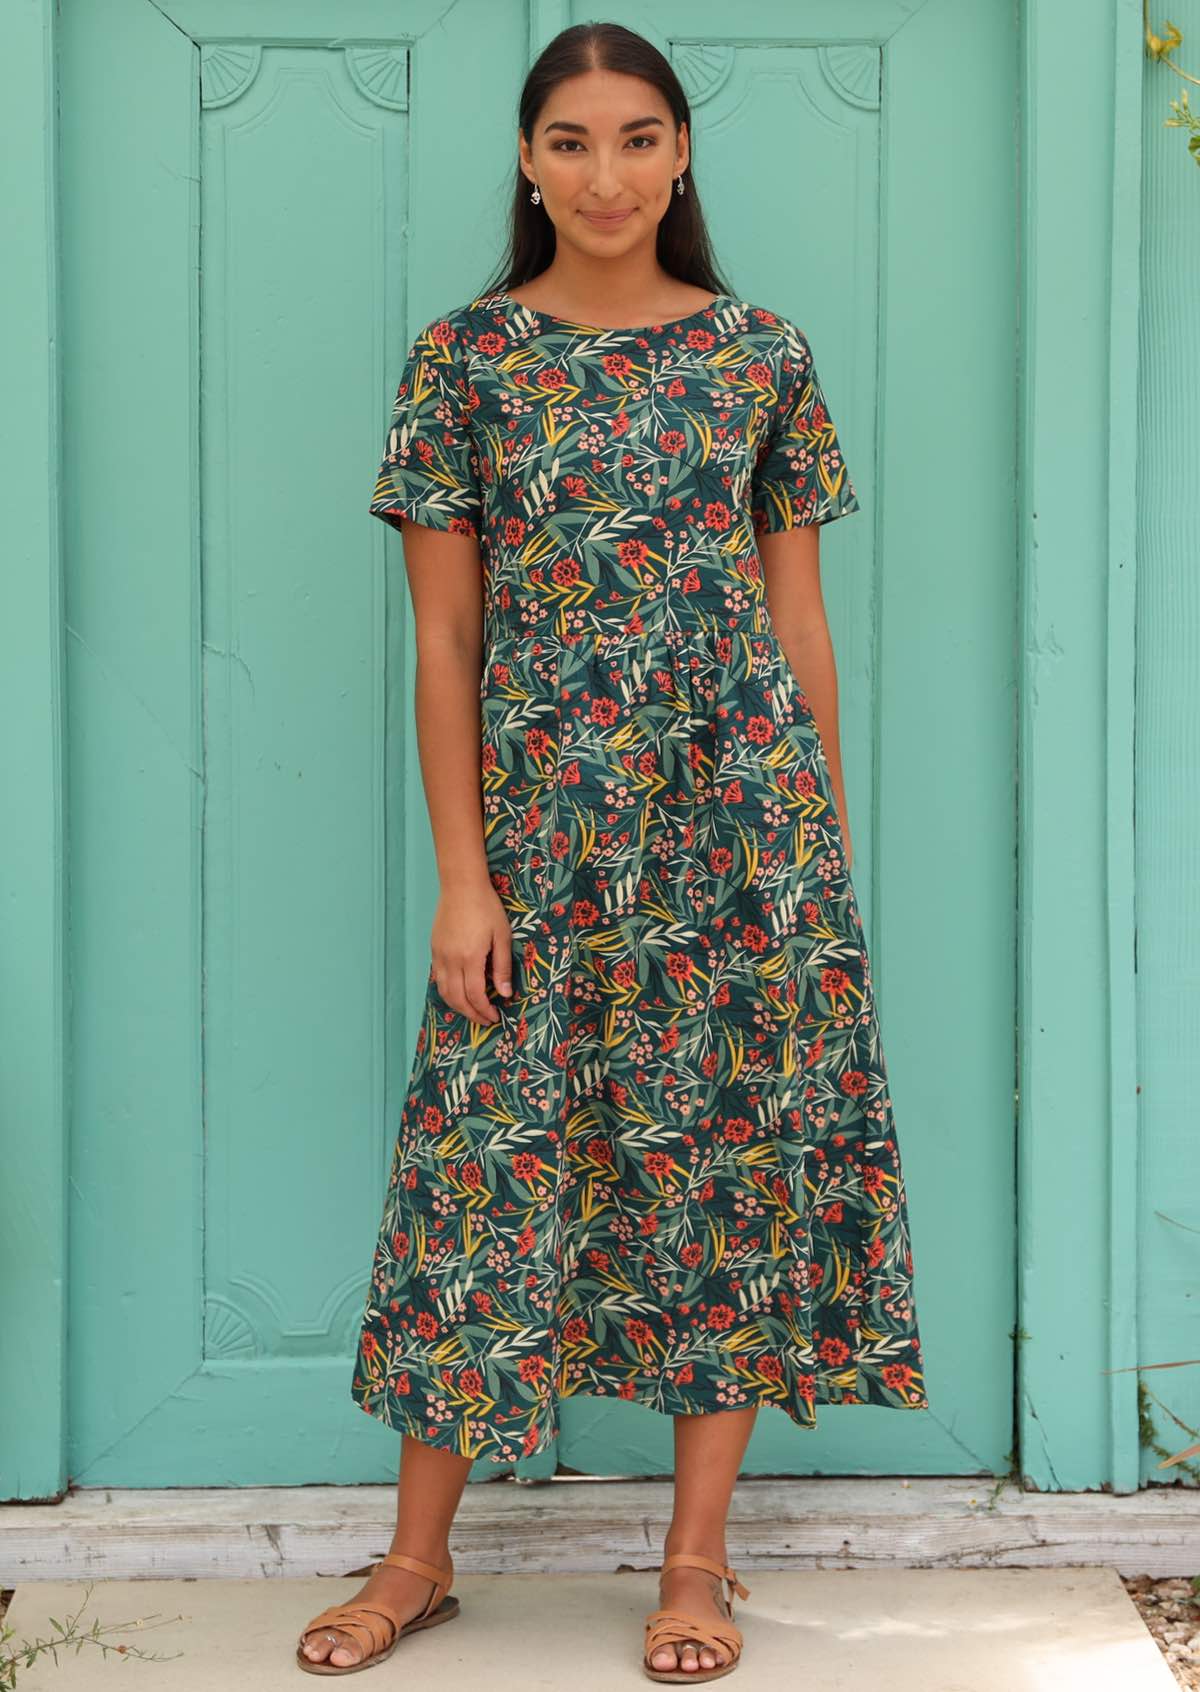 Model styles 100% cotton dress with earrings and sandals. 